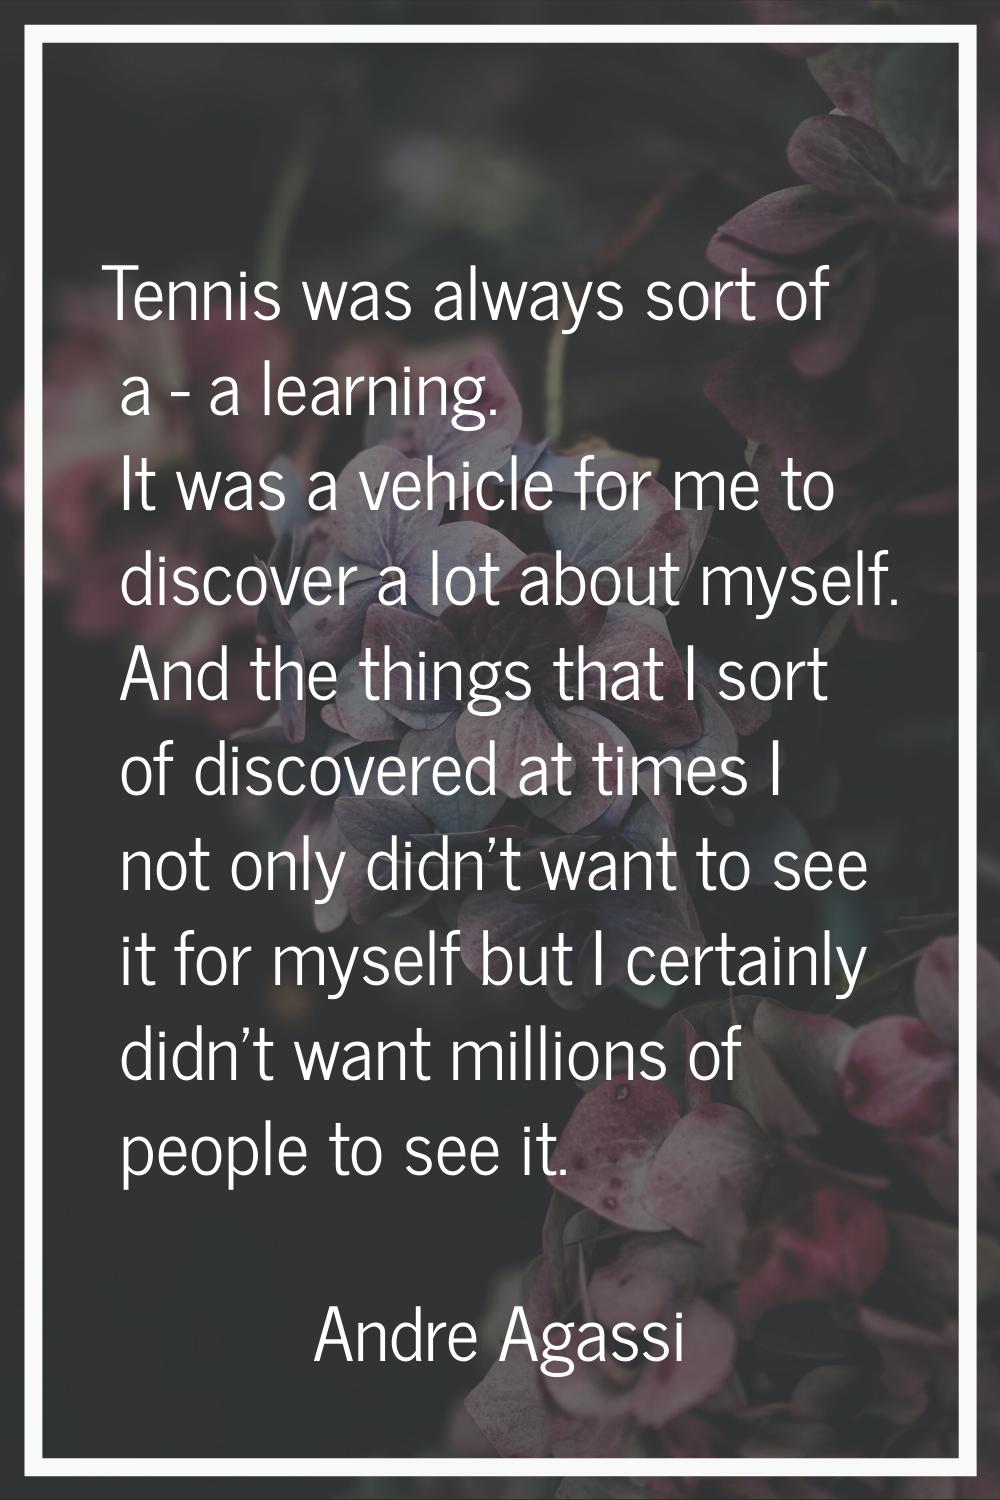 Tennis was always sort of a - a learning. It was a vehicle for me to discover a lot about myself. A